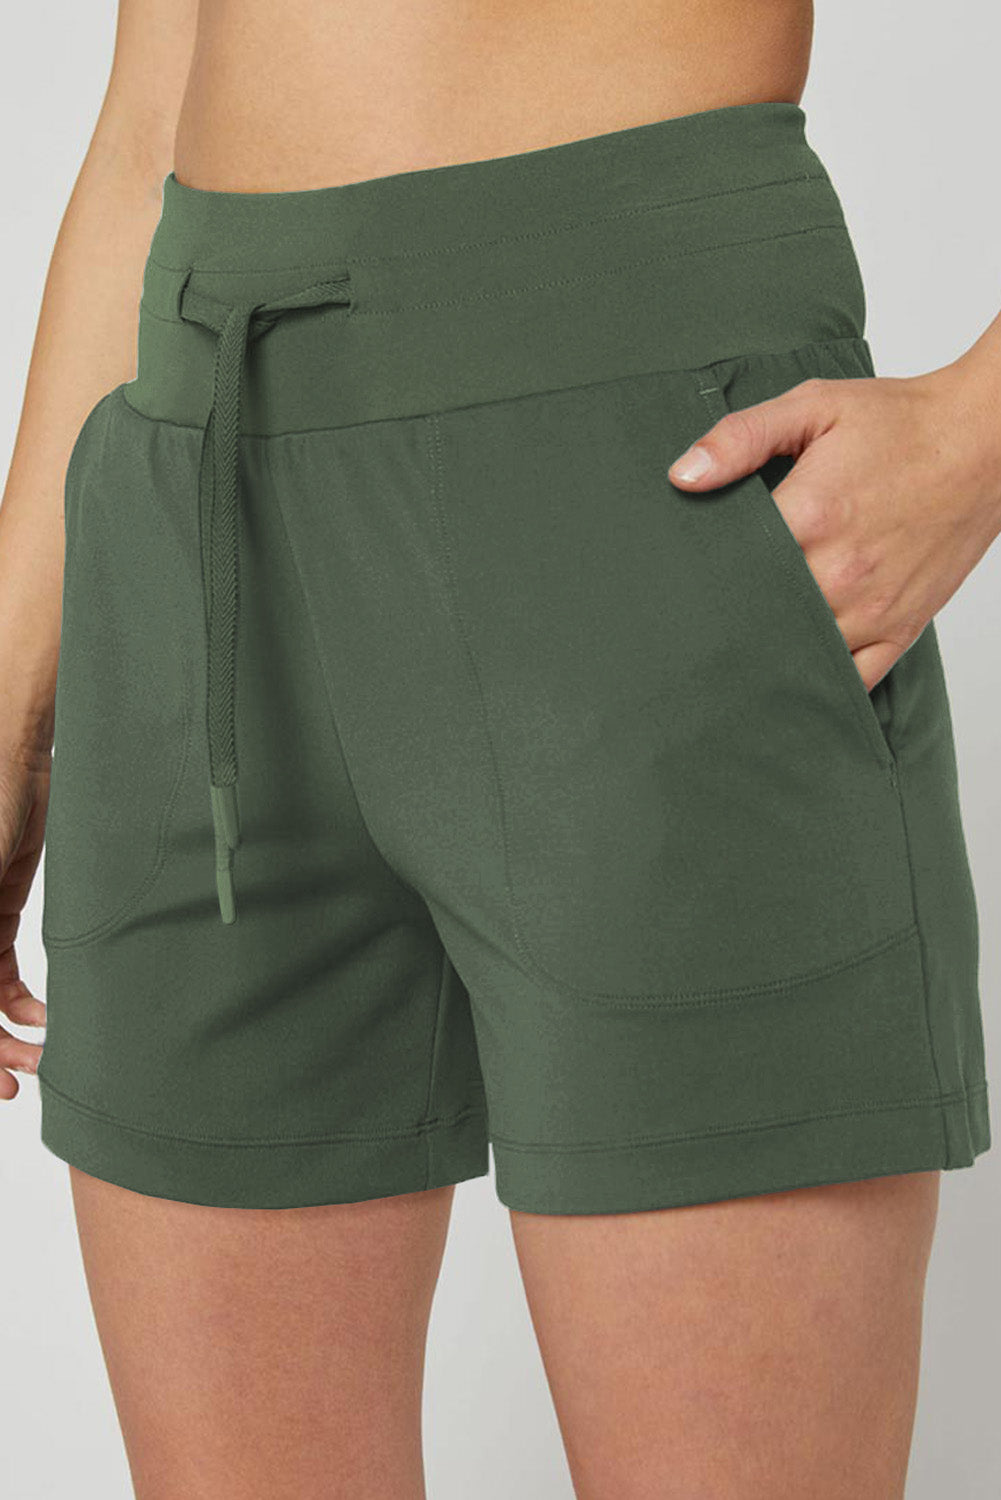 Drawstring Swim Shorts with Pockets  Sunset and Swim Army Green S 